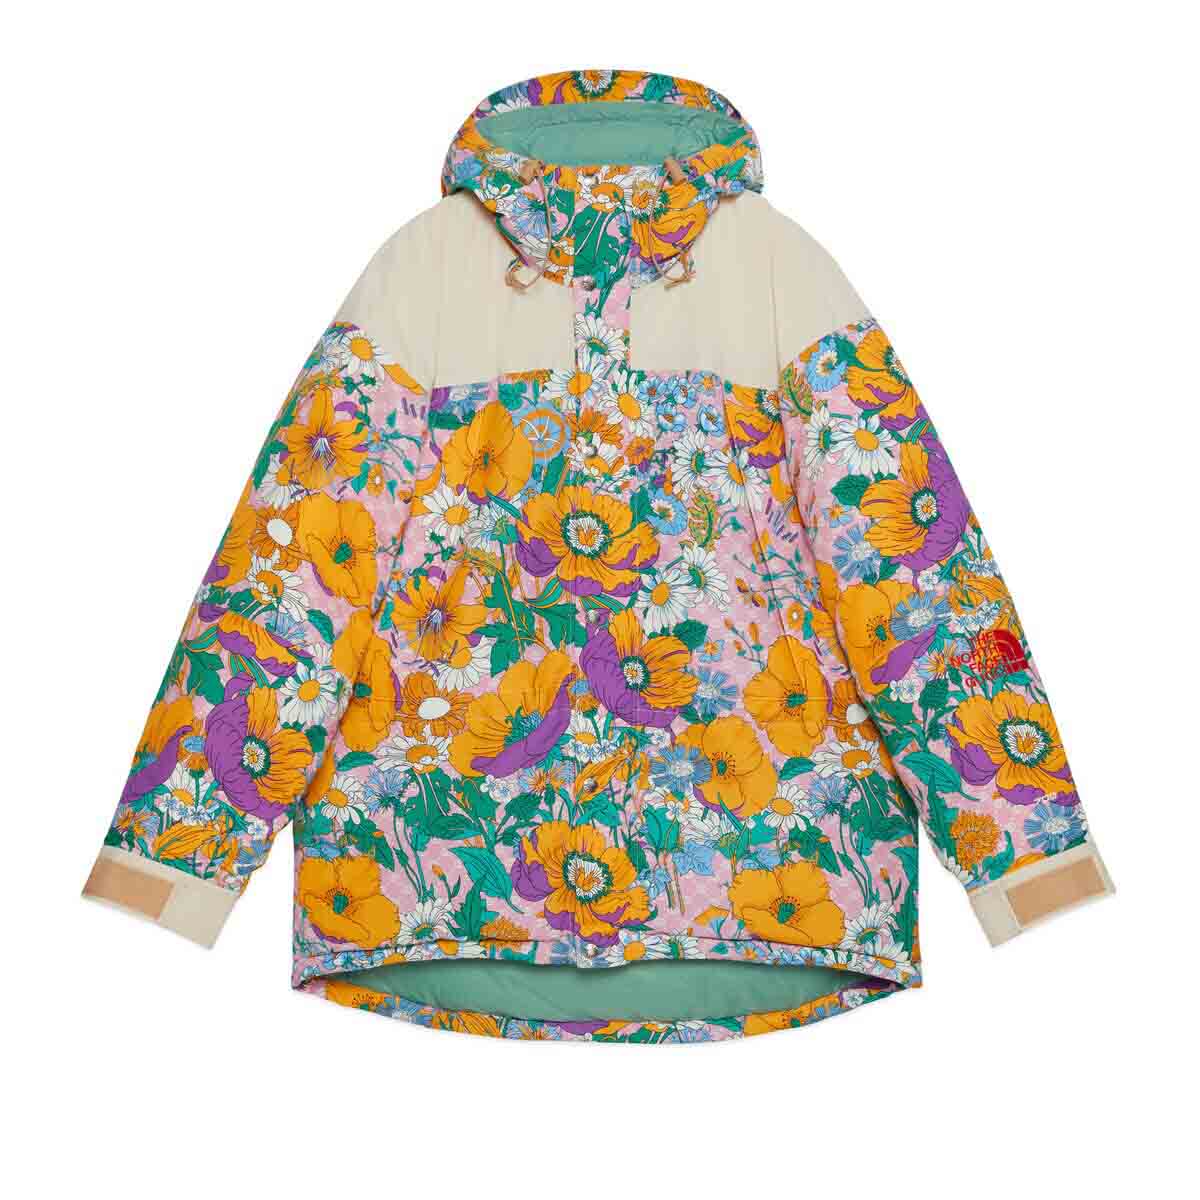 Gucci x The North Face Padded Jacket Floral Print - FW21